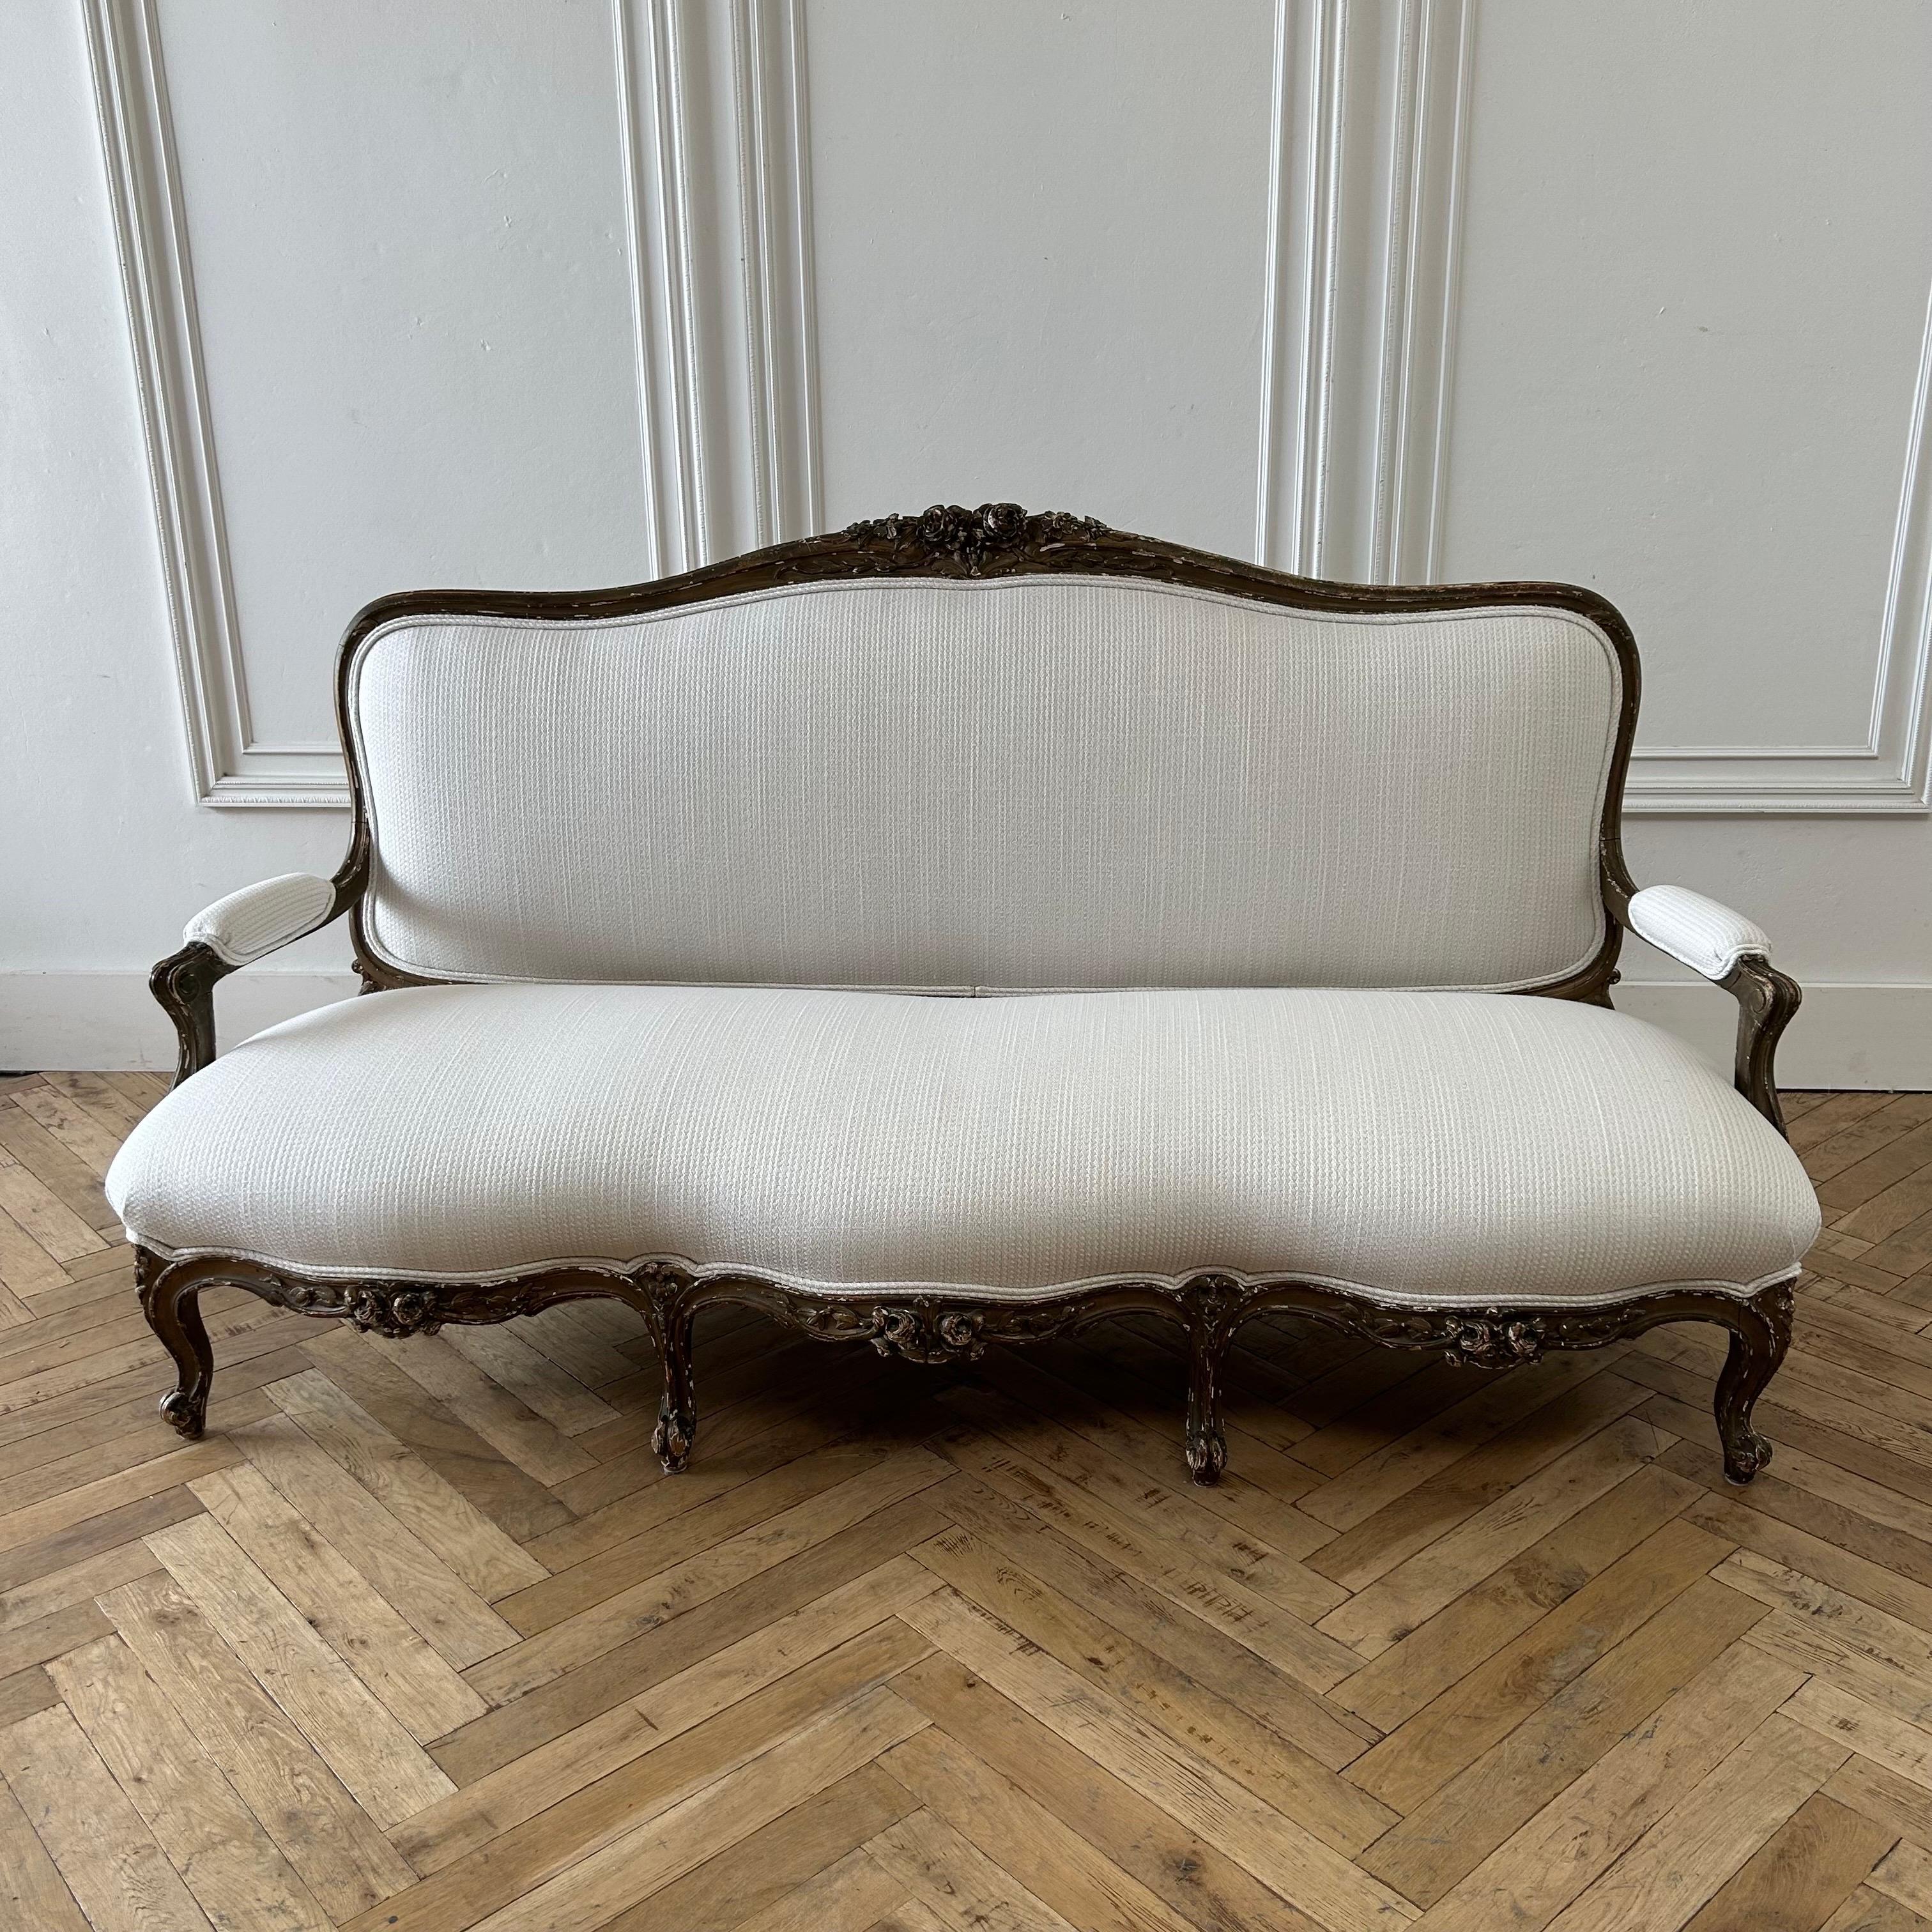 Antique French Gilt Wood Settee Upholstered in Antique White Wool and Cashmere For Sale 1